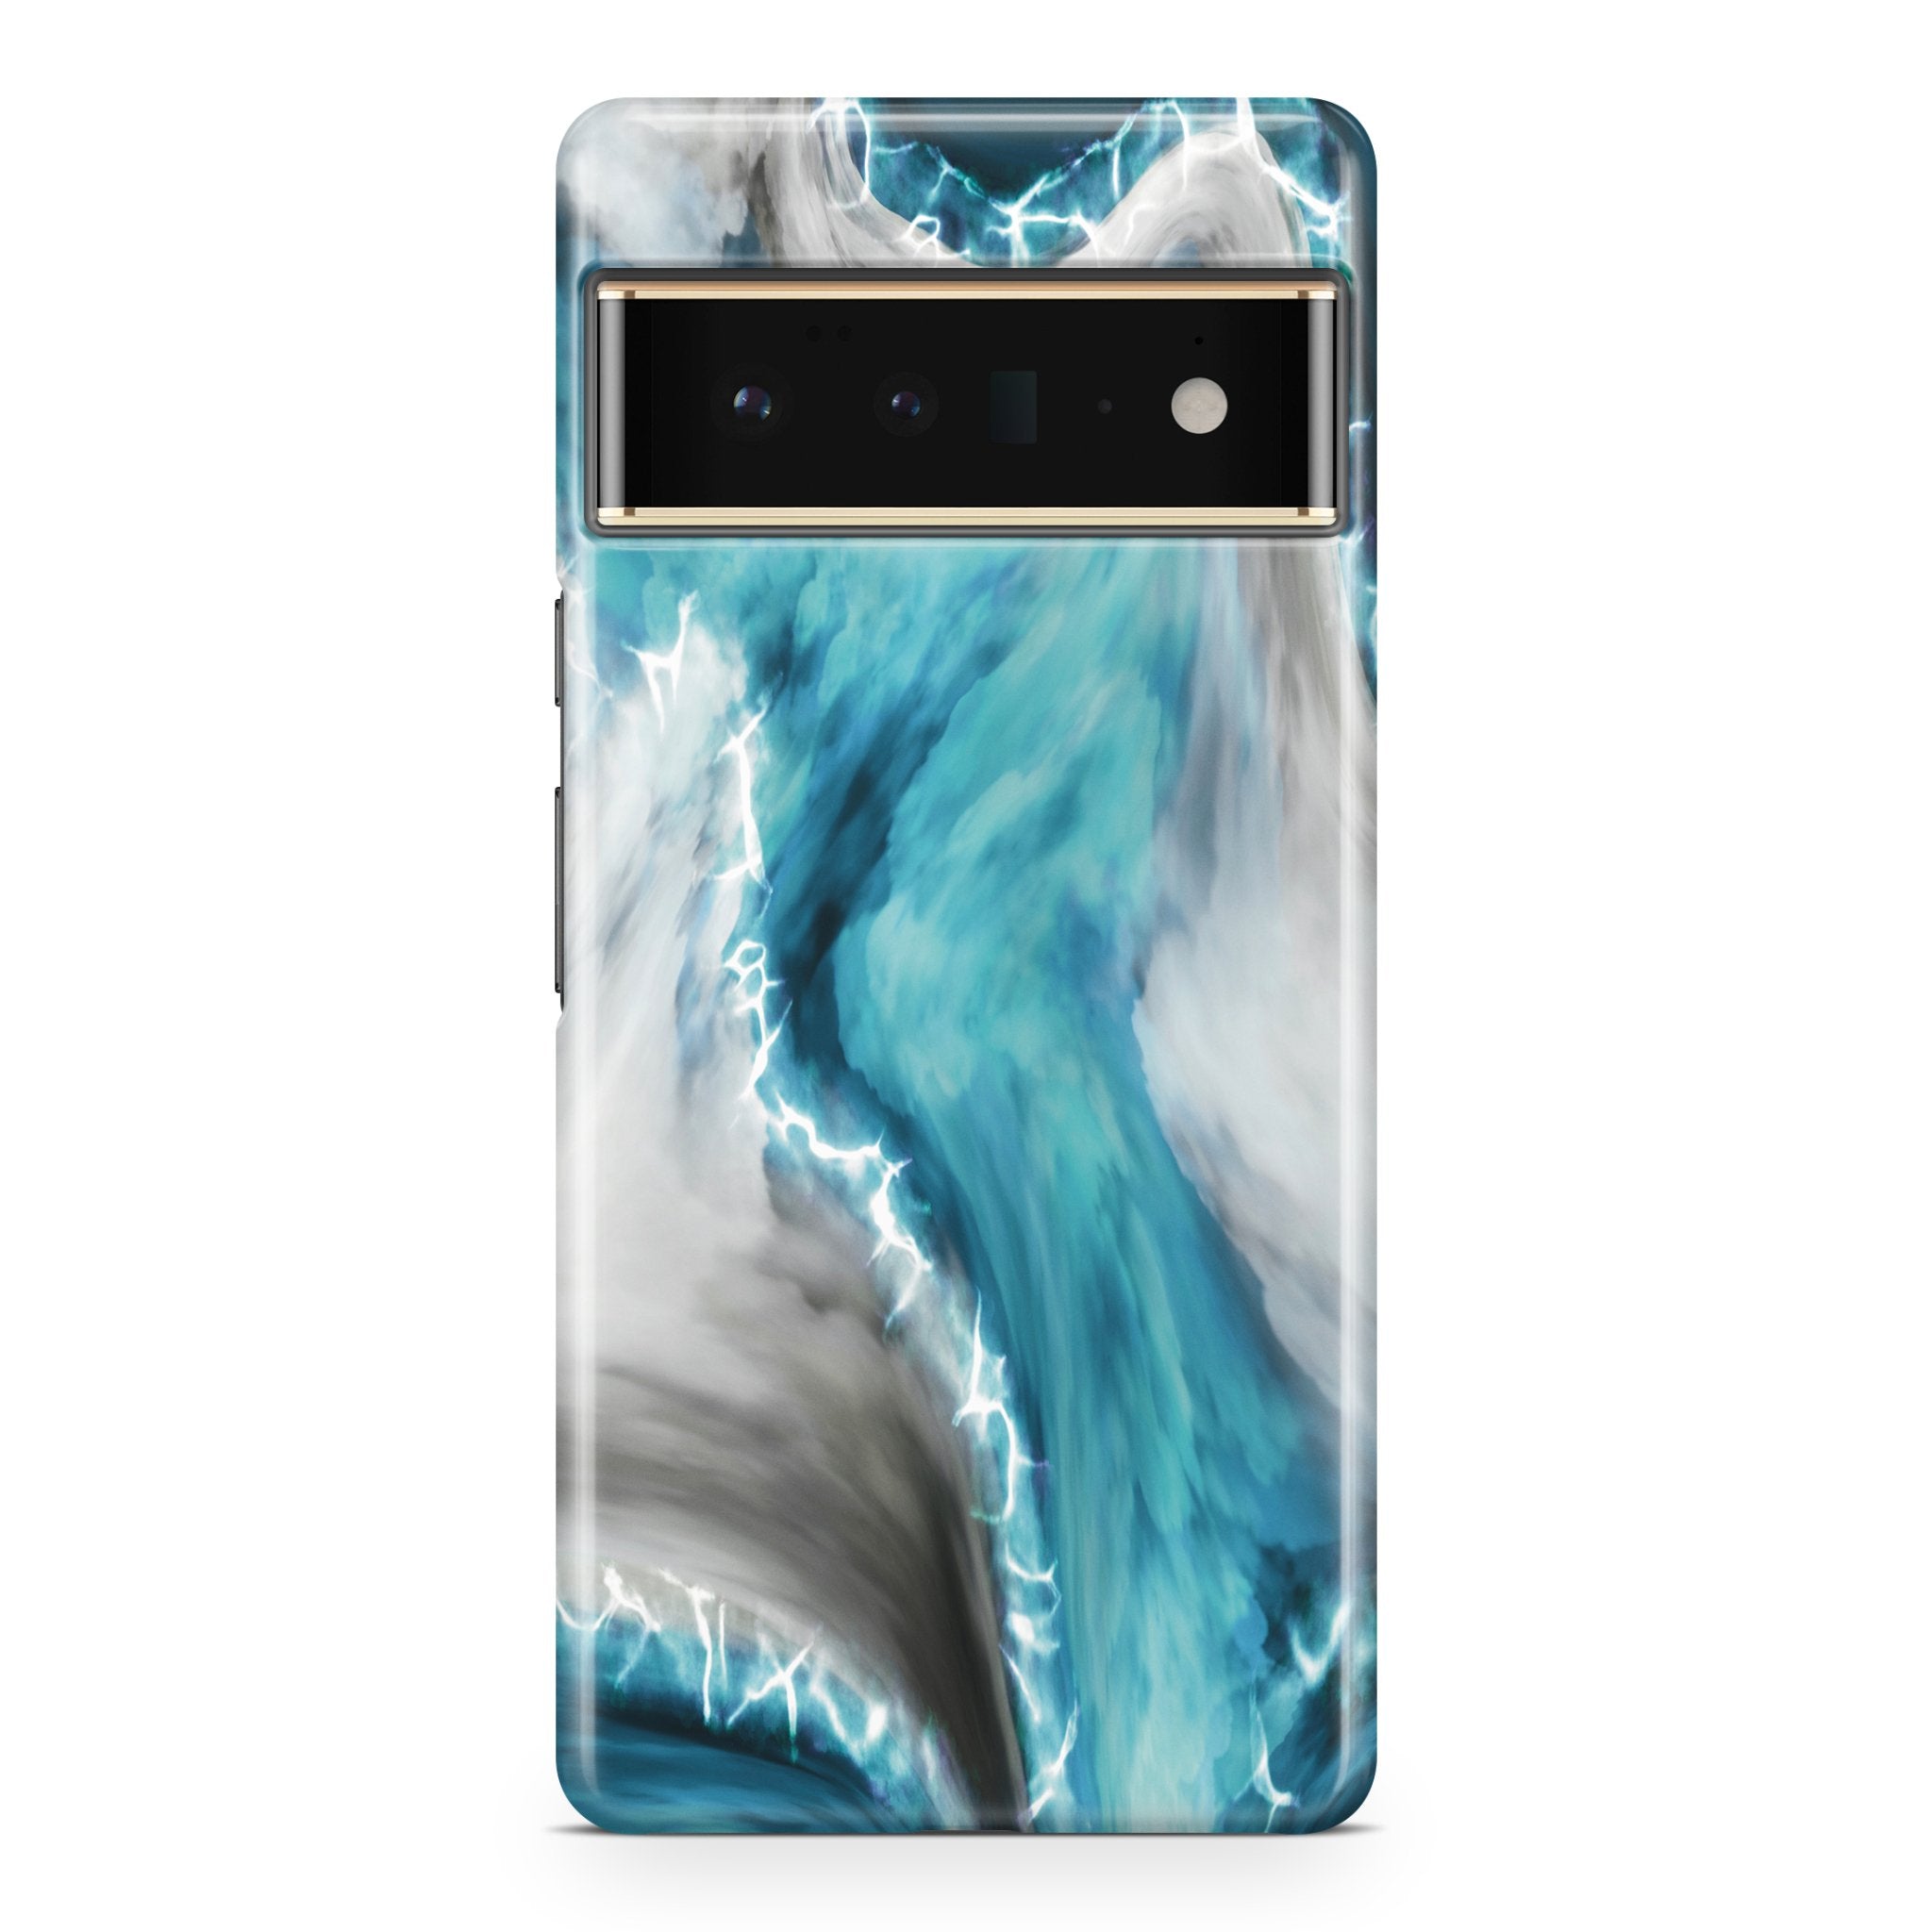 Cracked Ice - Google phone case designs by CaseSwagger